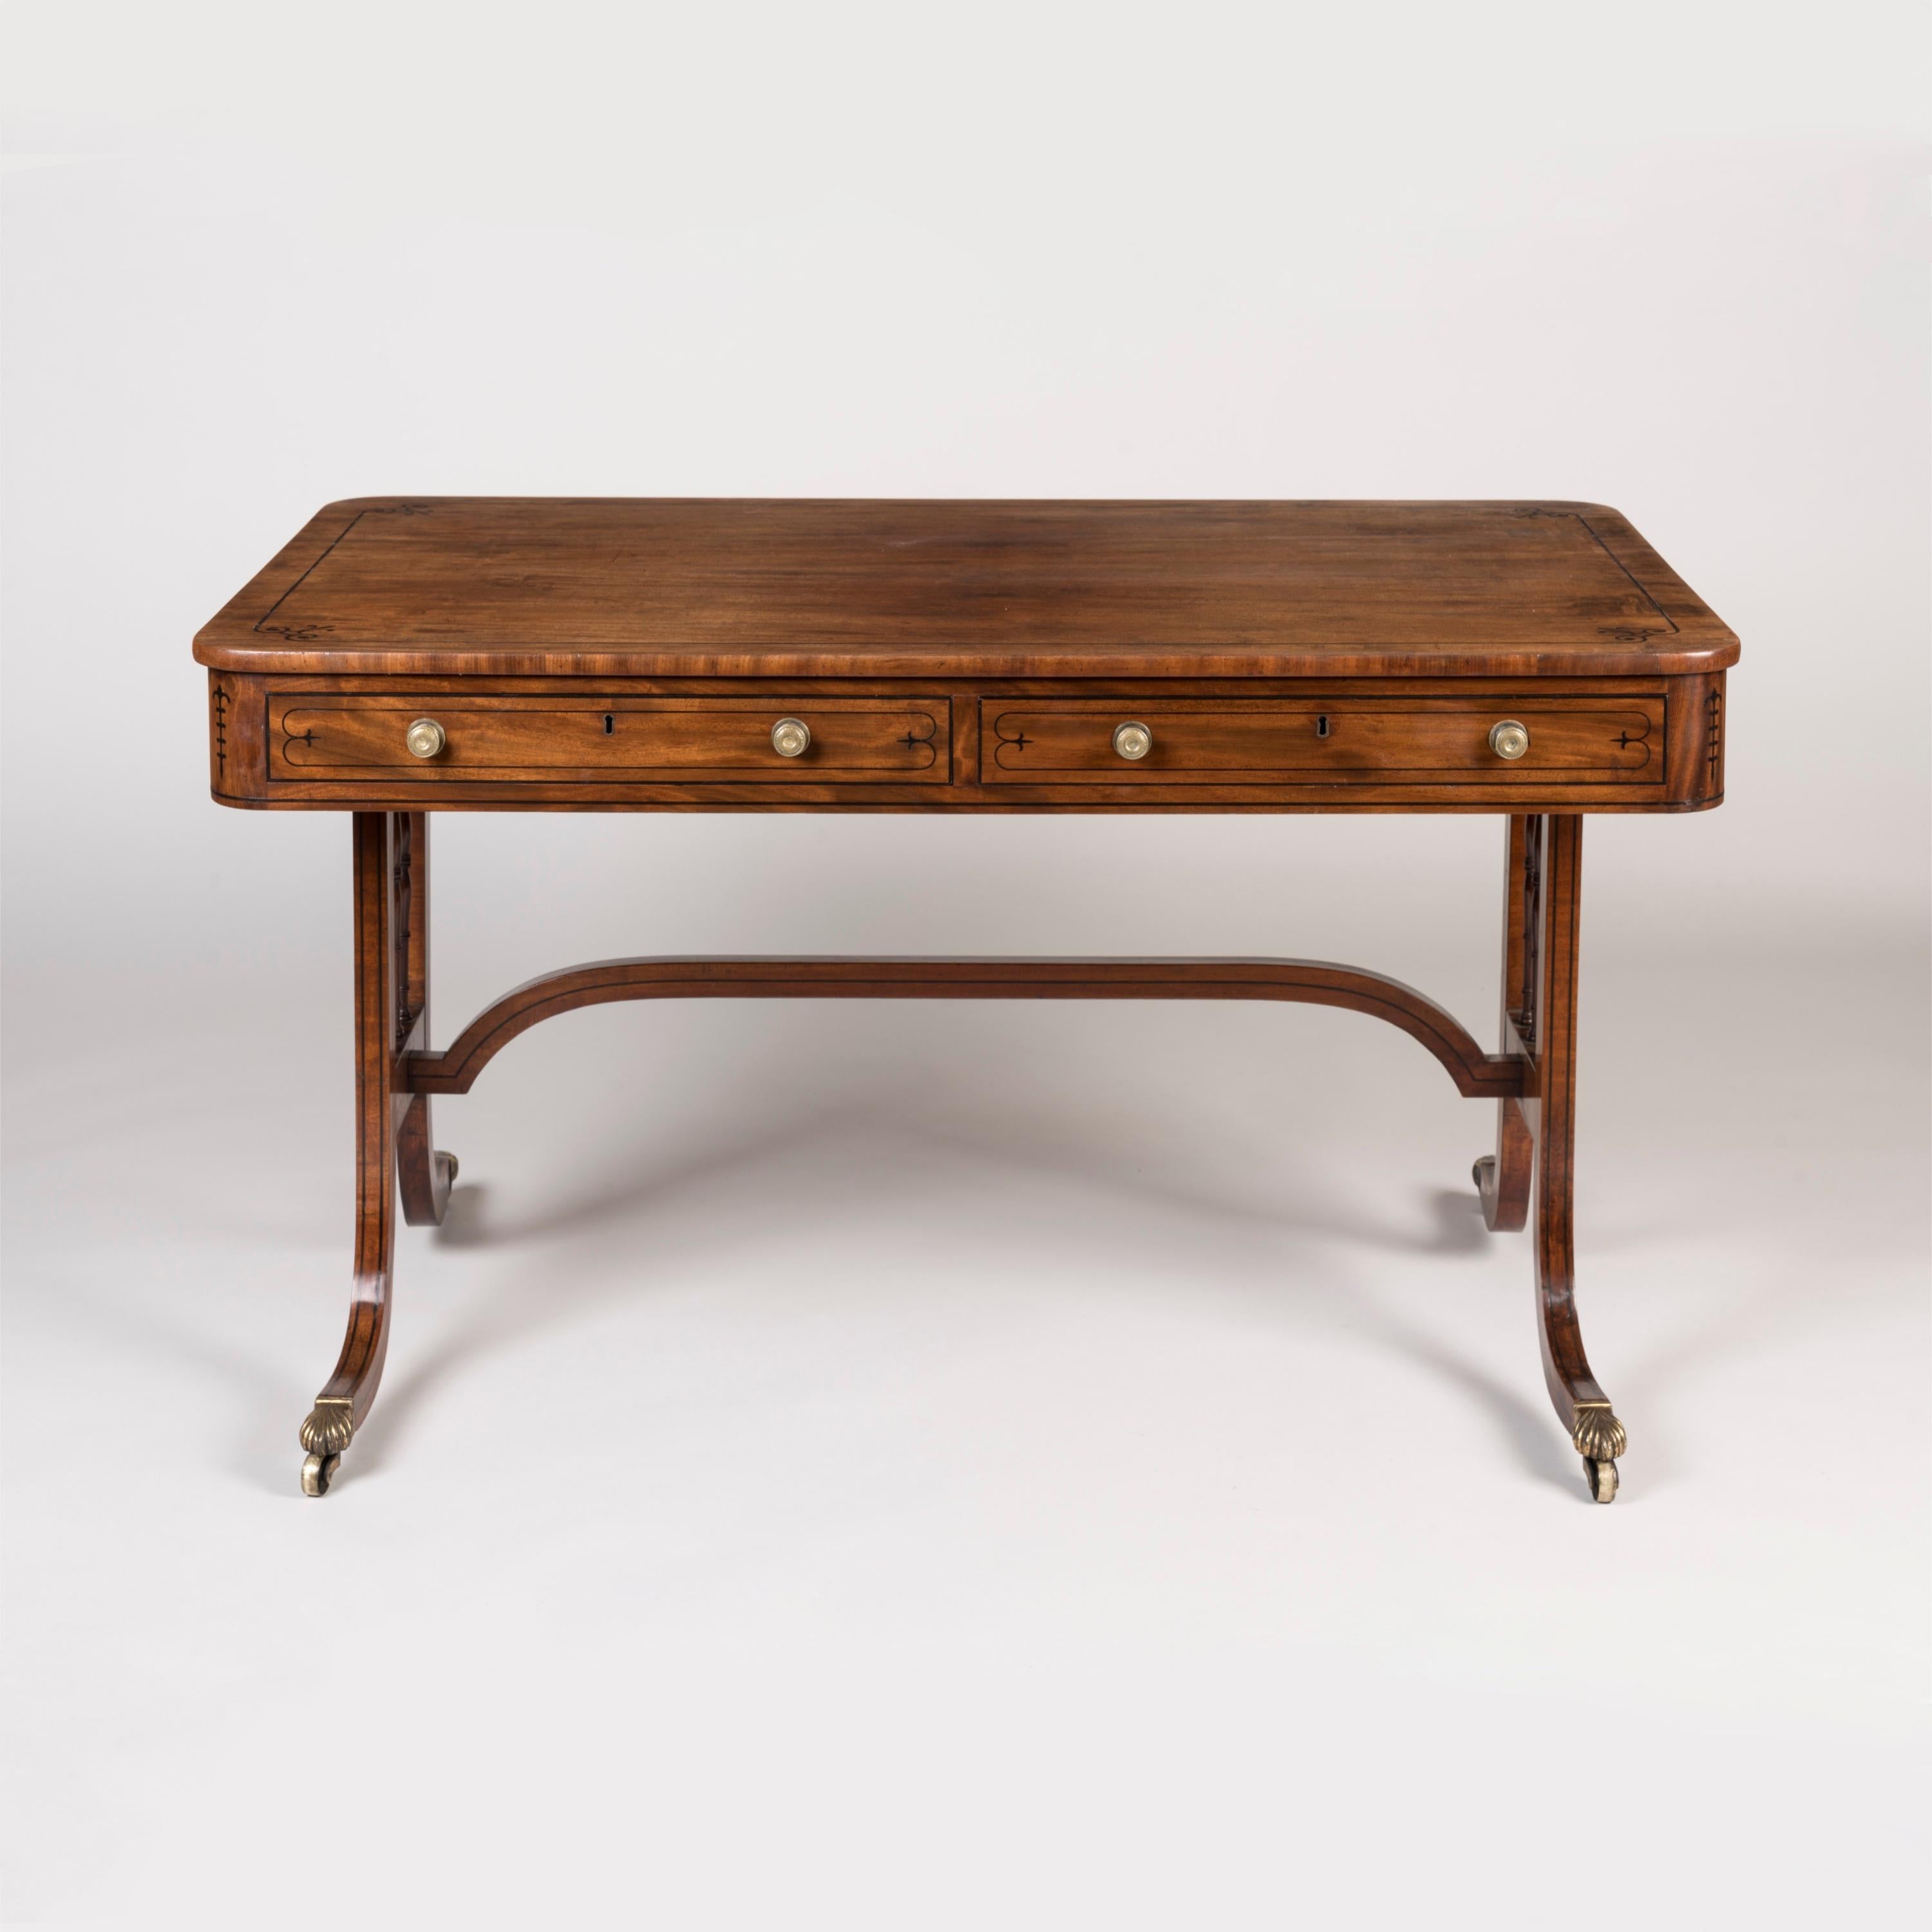 An Elegant Regency Period Table 
Attributed to Gillow

Constructed in a striking flamed Honduran mahogany: rising from brass castor shod swept and ebony strung legs, the ends housing vertical frames enclosing triple tapering and turned spindles and